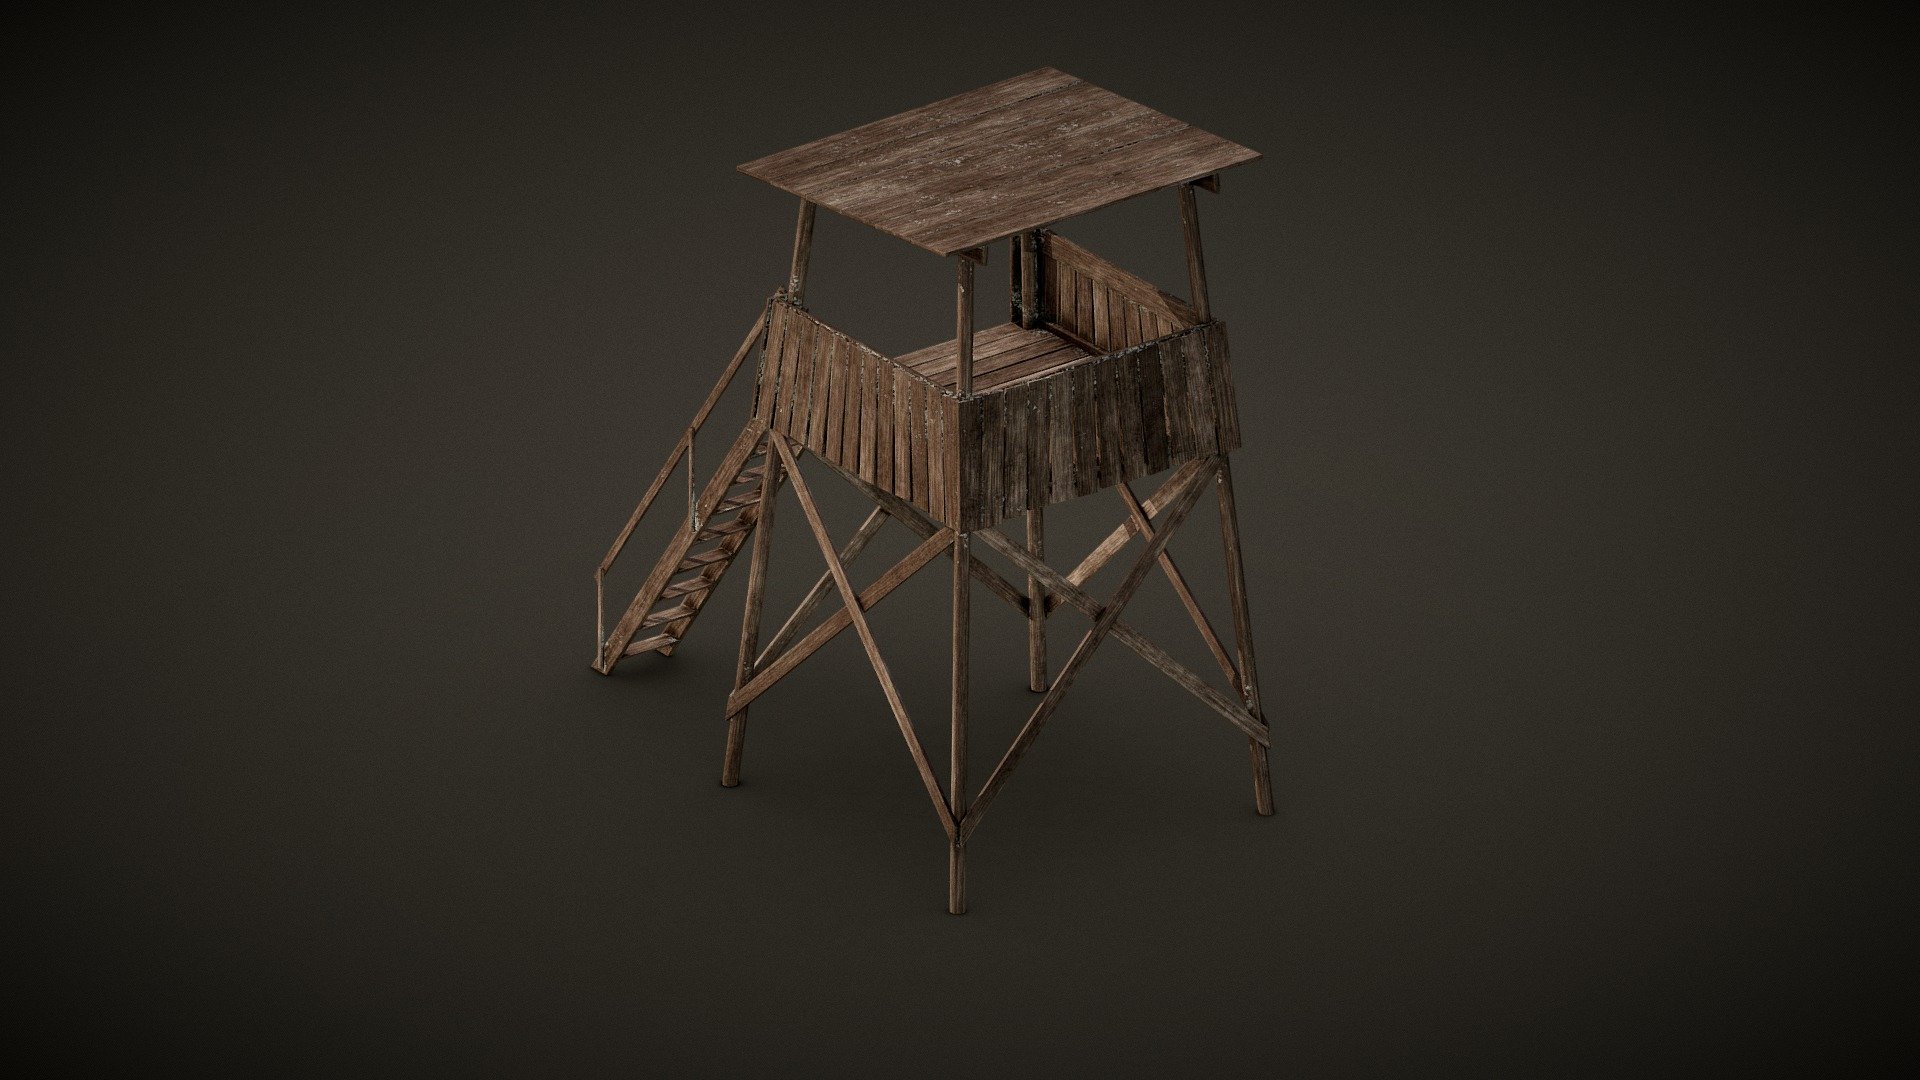 German watch tower from the Auschwitz concentration camp.

Fully opaque model consists of 960 vertices or 1,536 tris. Tower is 4.5 units tall.

One material and three 2,048x2,048 PNG textures are supplied:




Albedo

Occlusion + Roughness + Metallic

Normal (Y+ Up)

Modeled in Blender 2.91 and textured using Substance Painter 2019 3d model